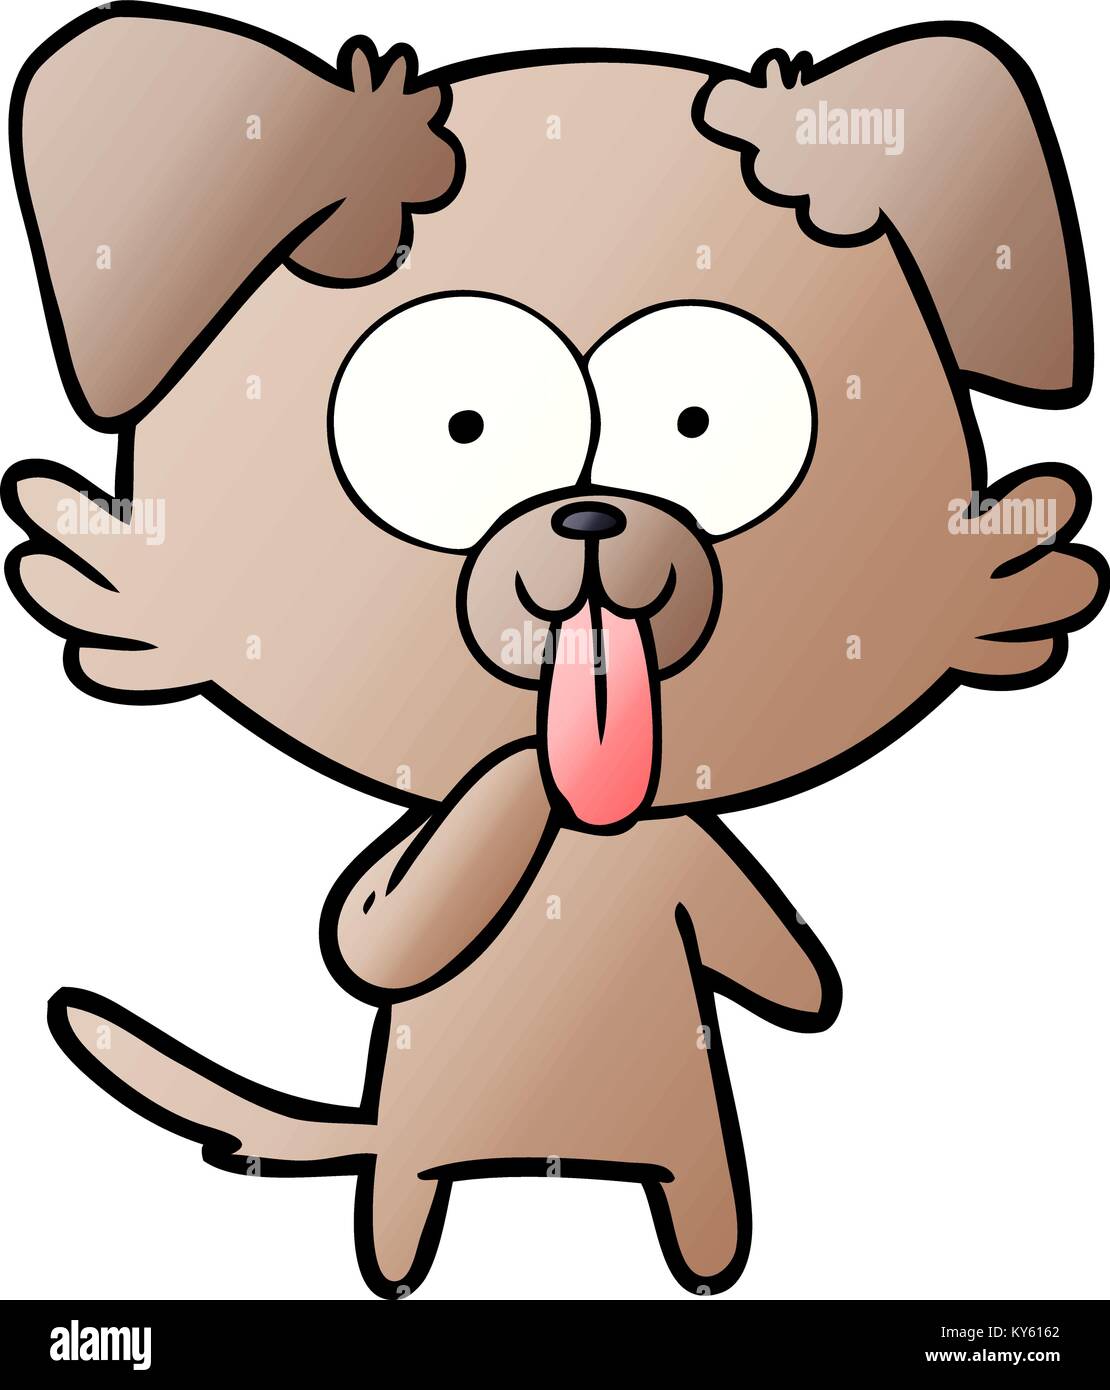 cartoon dog with tongue sticking out Stock Vector